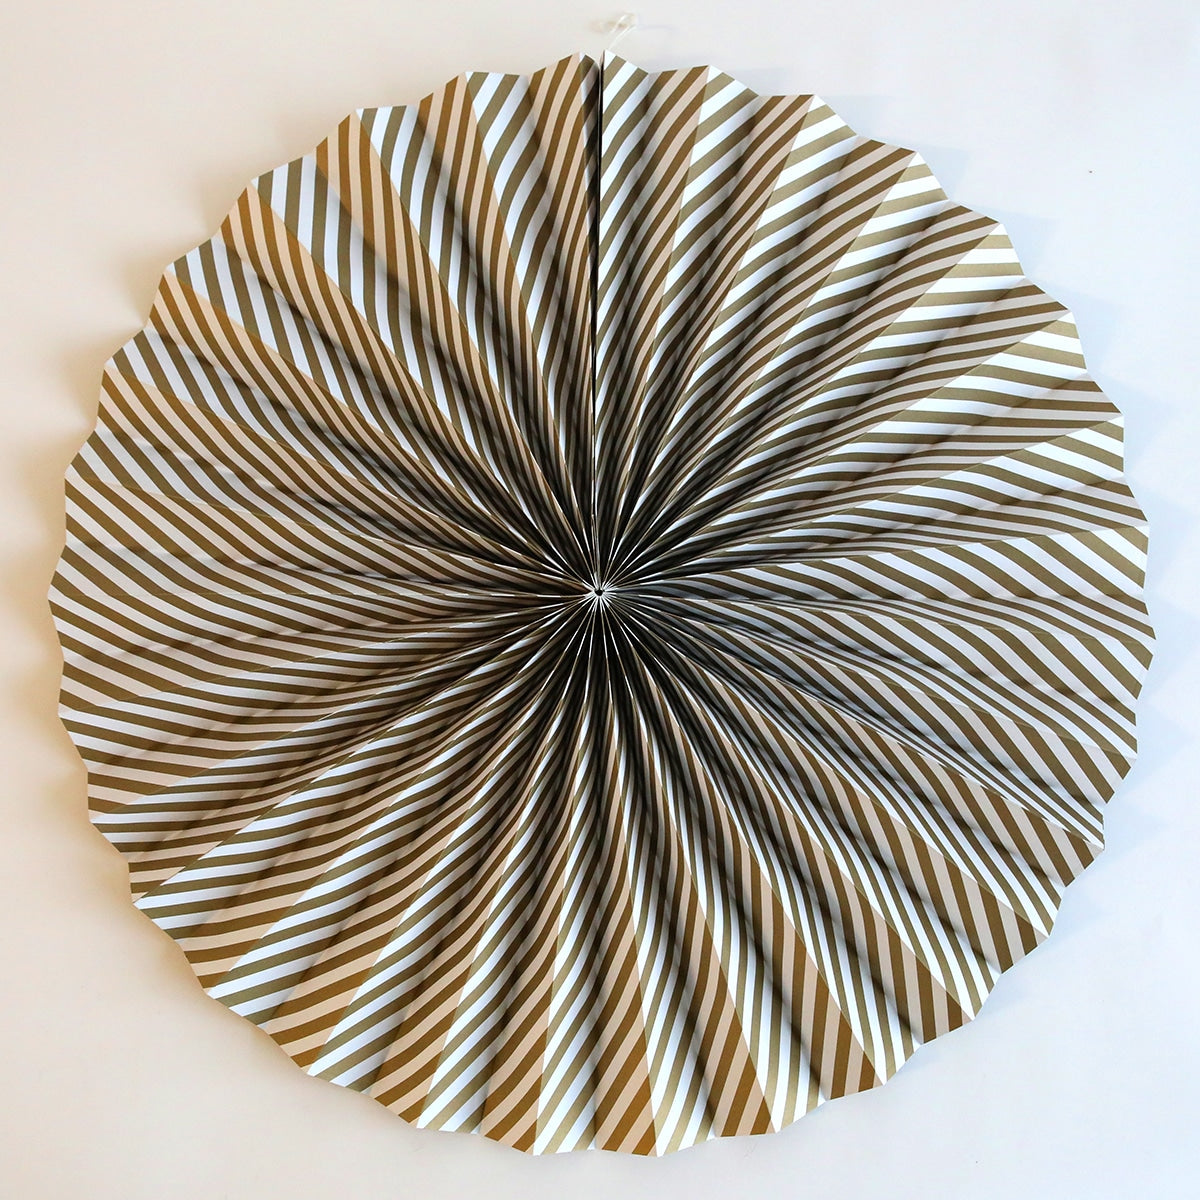 a circular metal object on a white wall.